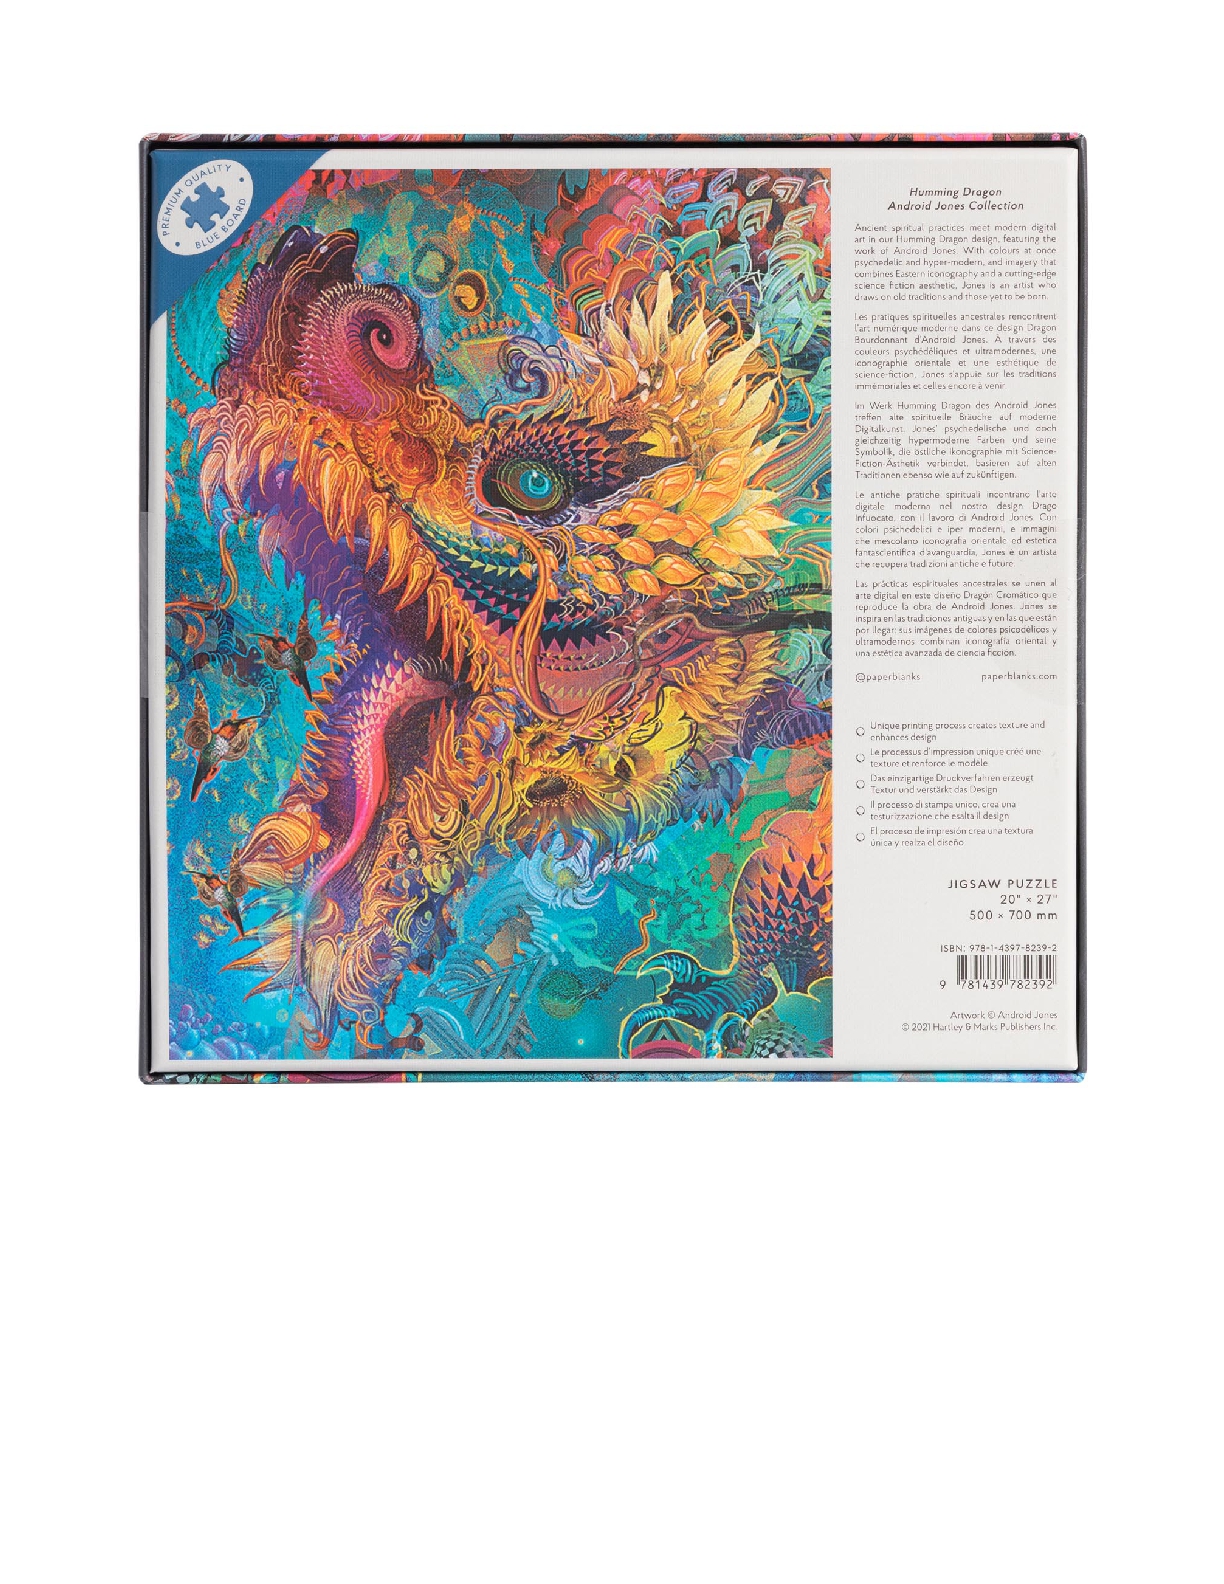 Humming Dragon, Android Jones Collection, Puzzle, 1000 PC